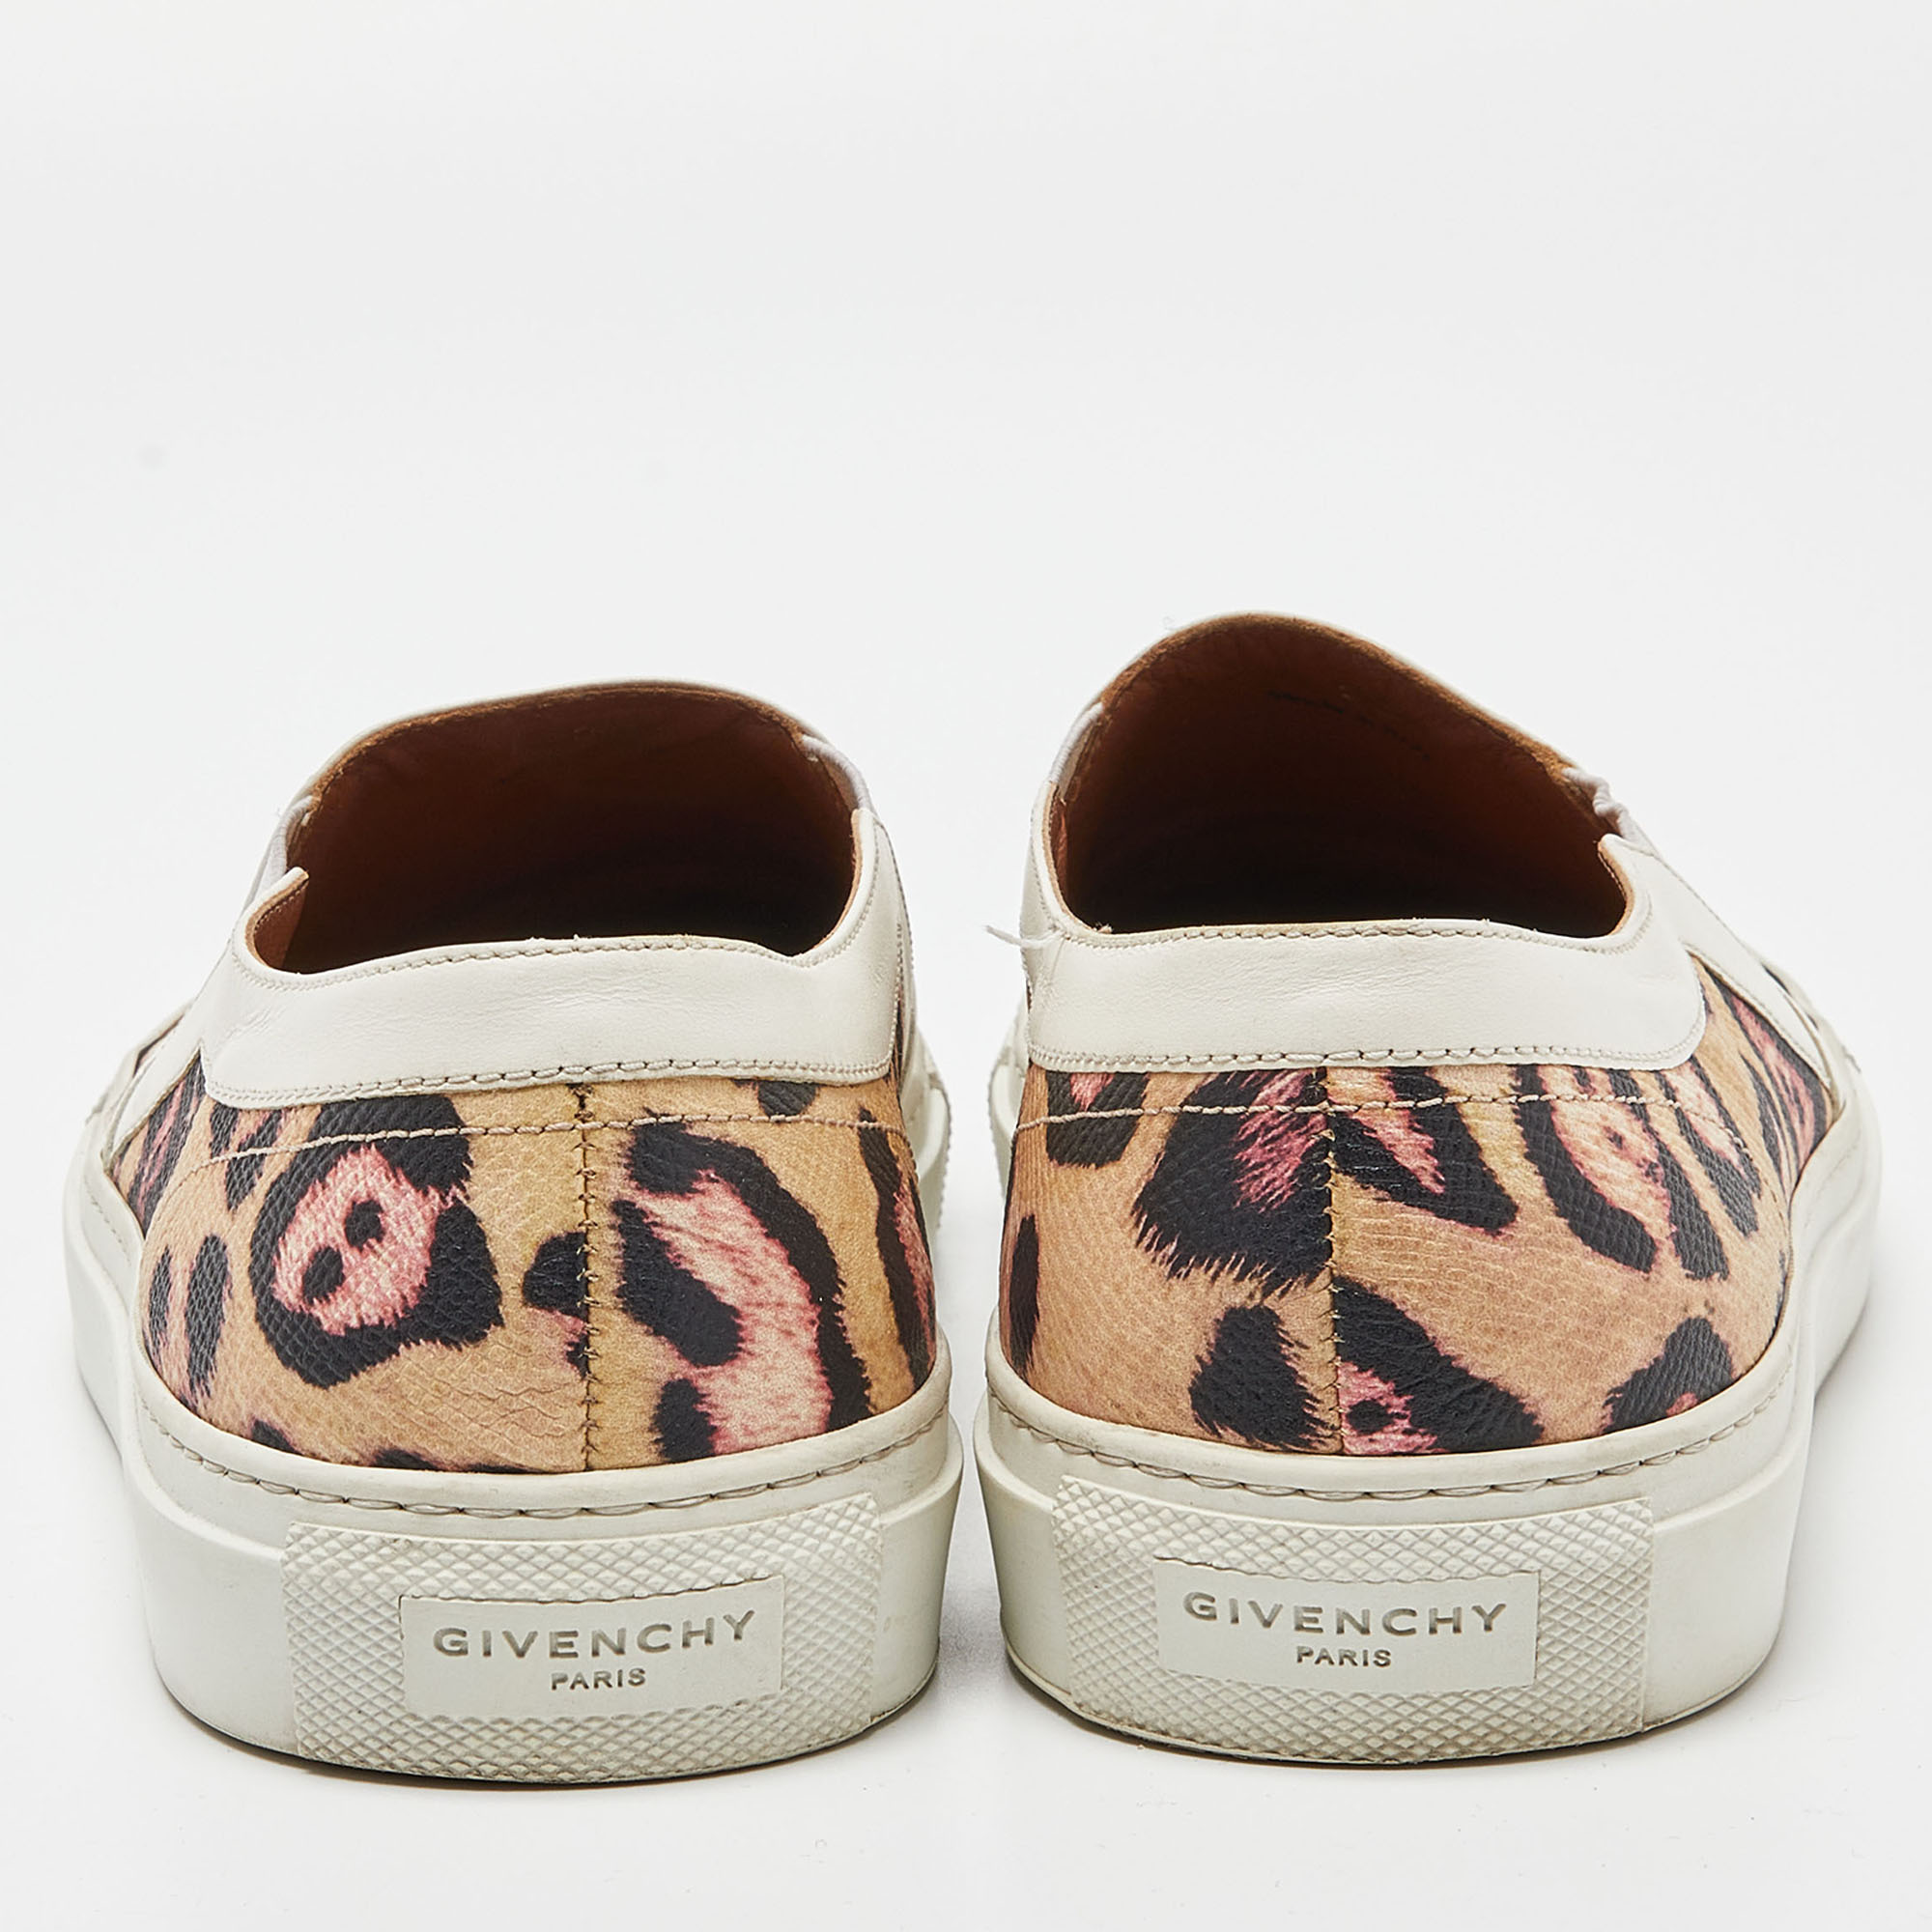 Givenchy Tricolor Animal Print Leather Skate Basse New Sneakers Size 38